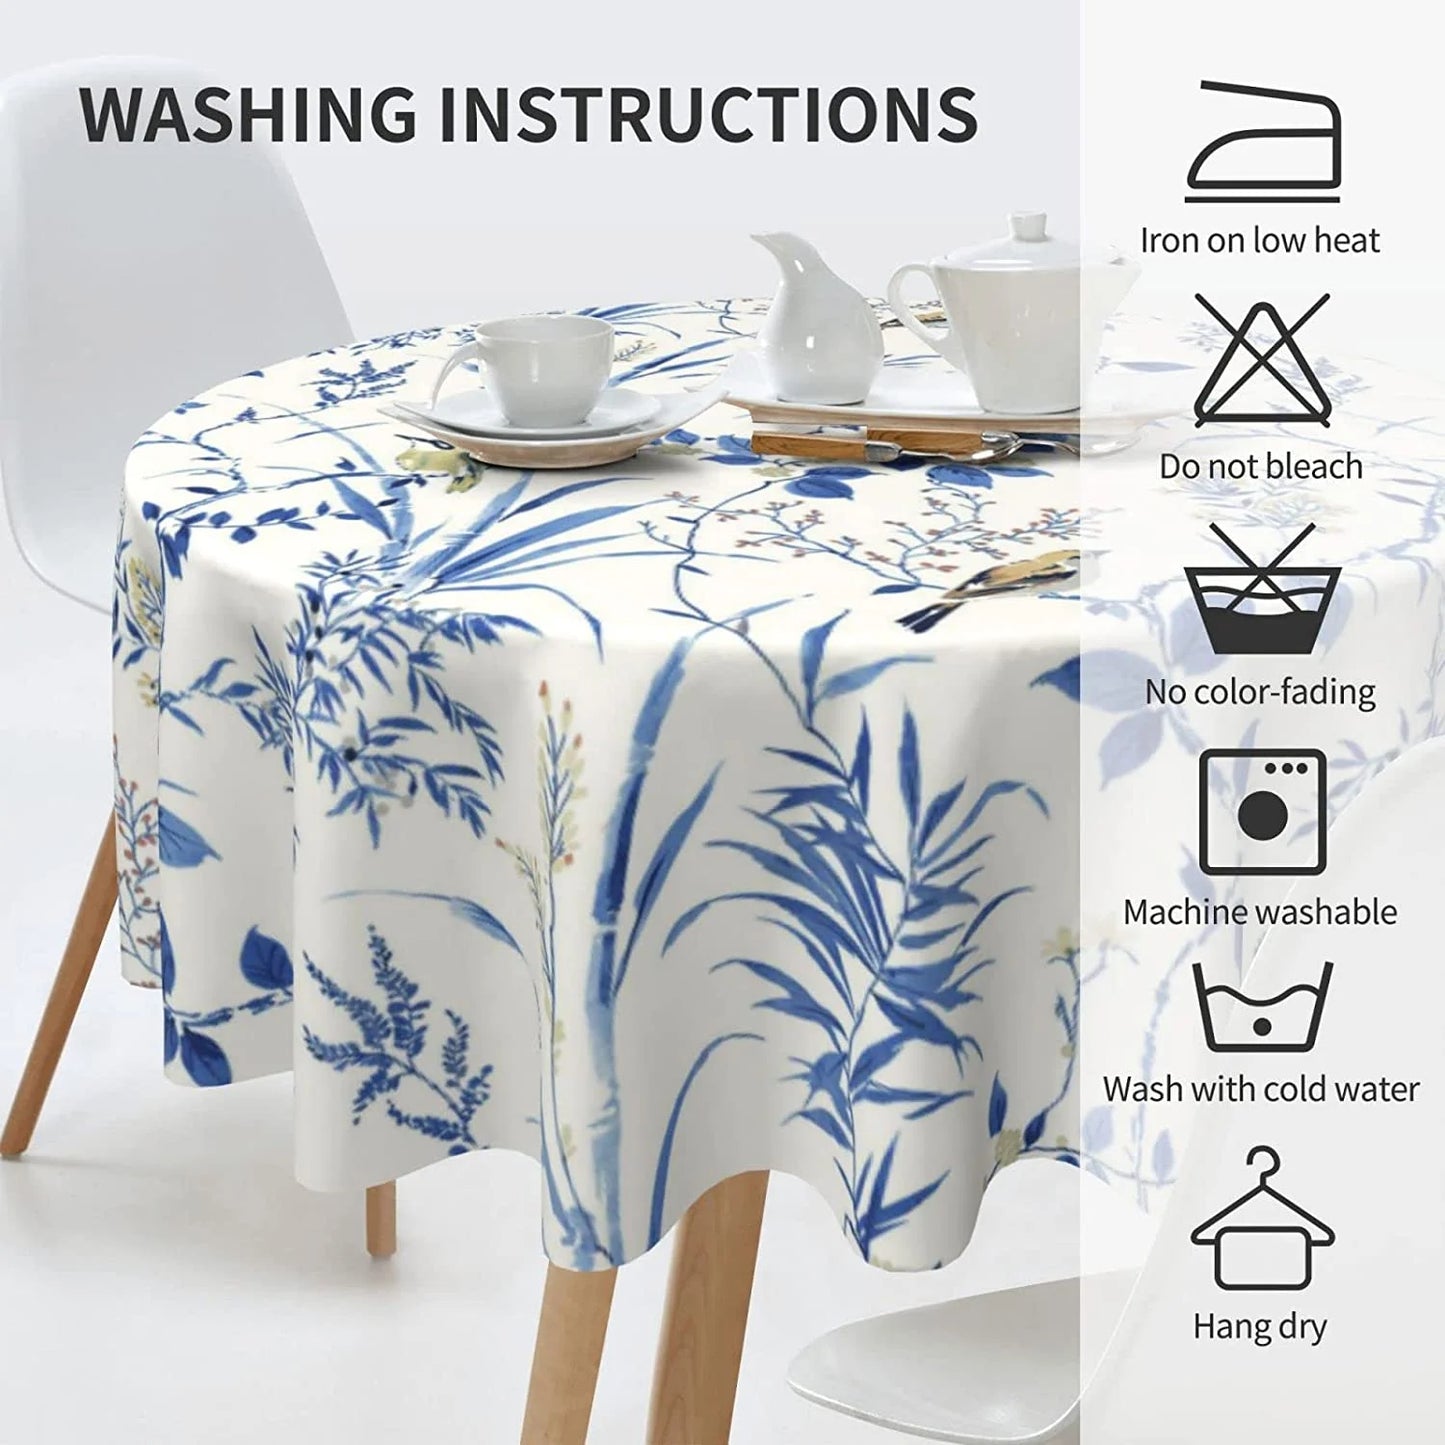 Uzotxy Blue Floral Tablecloth 60 Inch Round Wrinkle Free Flower Tablecloth Suitable for Kitchen Decorantion / Indoor and Outdoor Dining Table / Party / Picnic